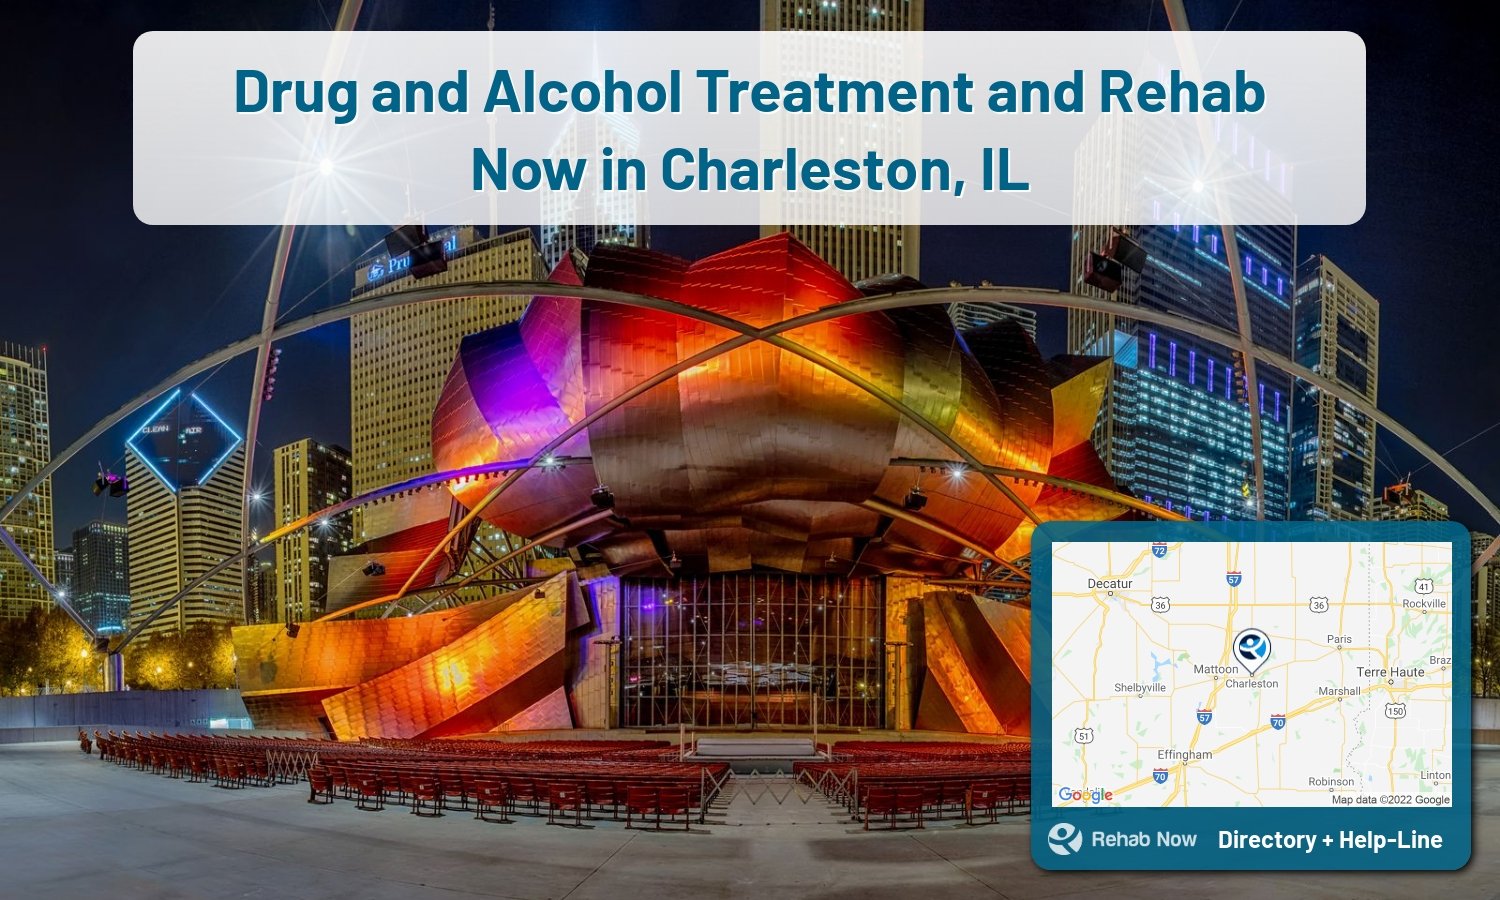 View options, availability, treatment methods, and more, for drug rehab and alcohol treatment in Charleston, Illinois